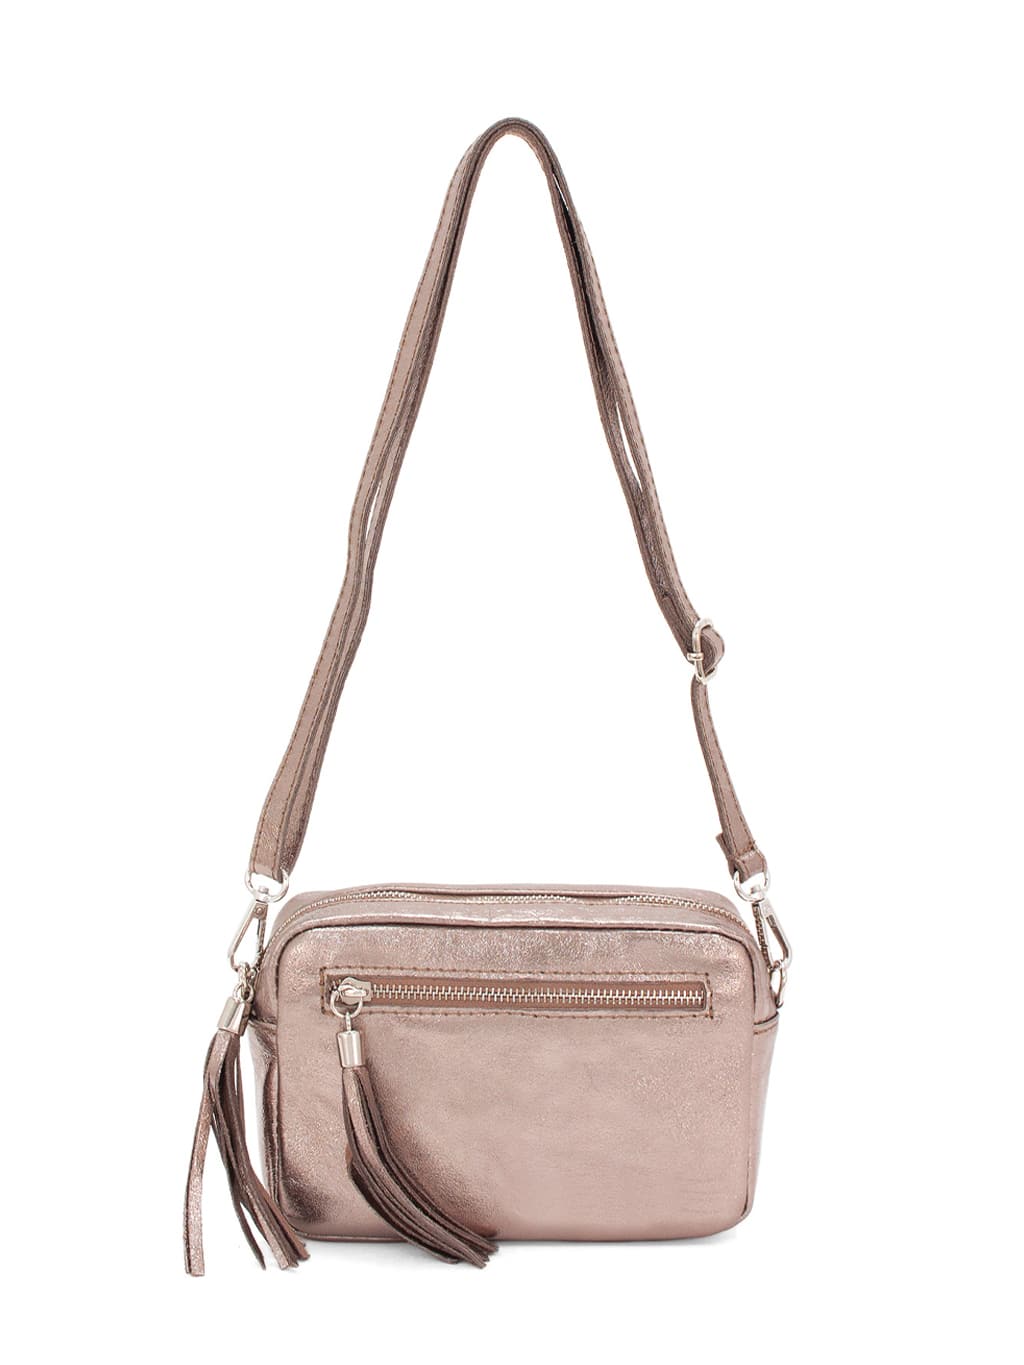 box bag rose gold with strap